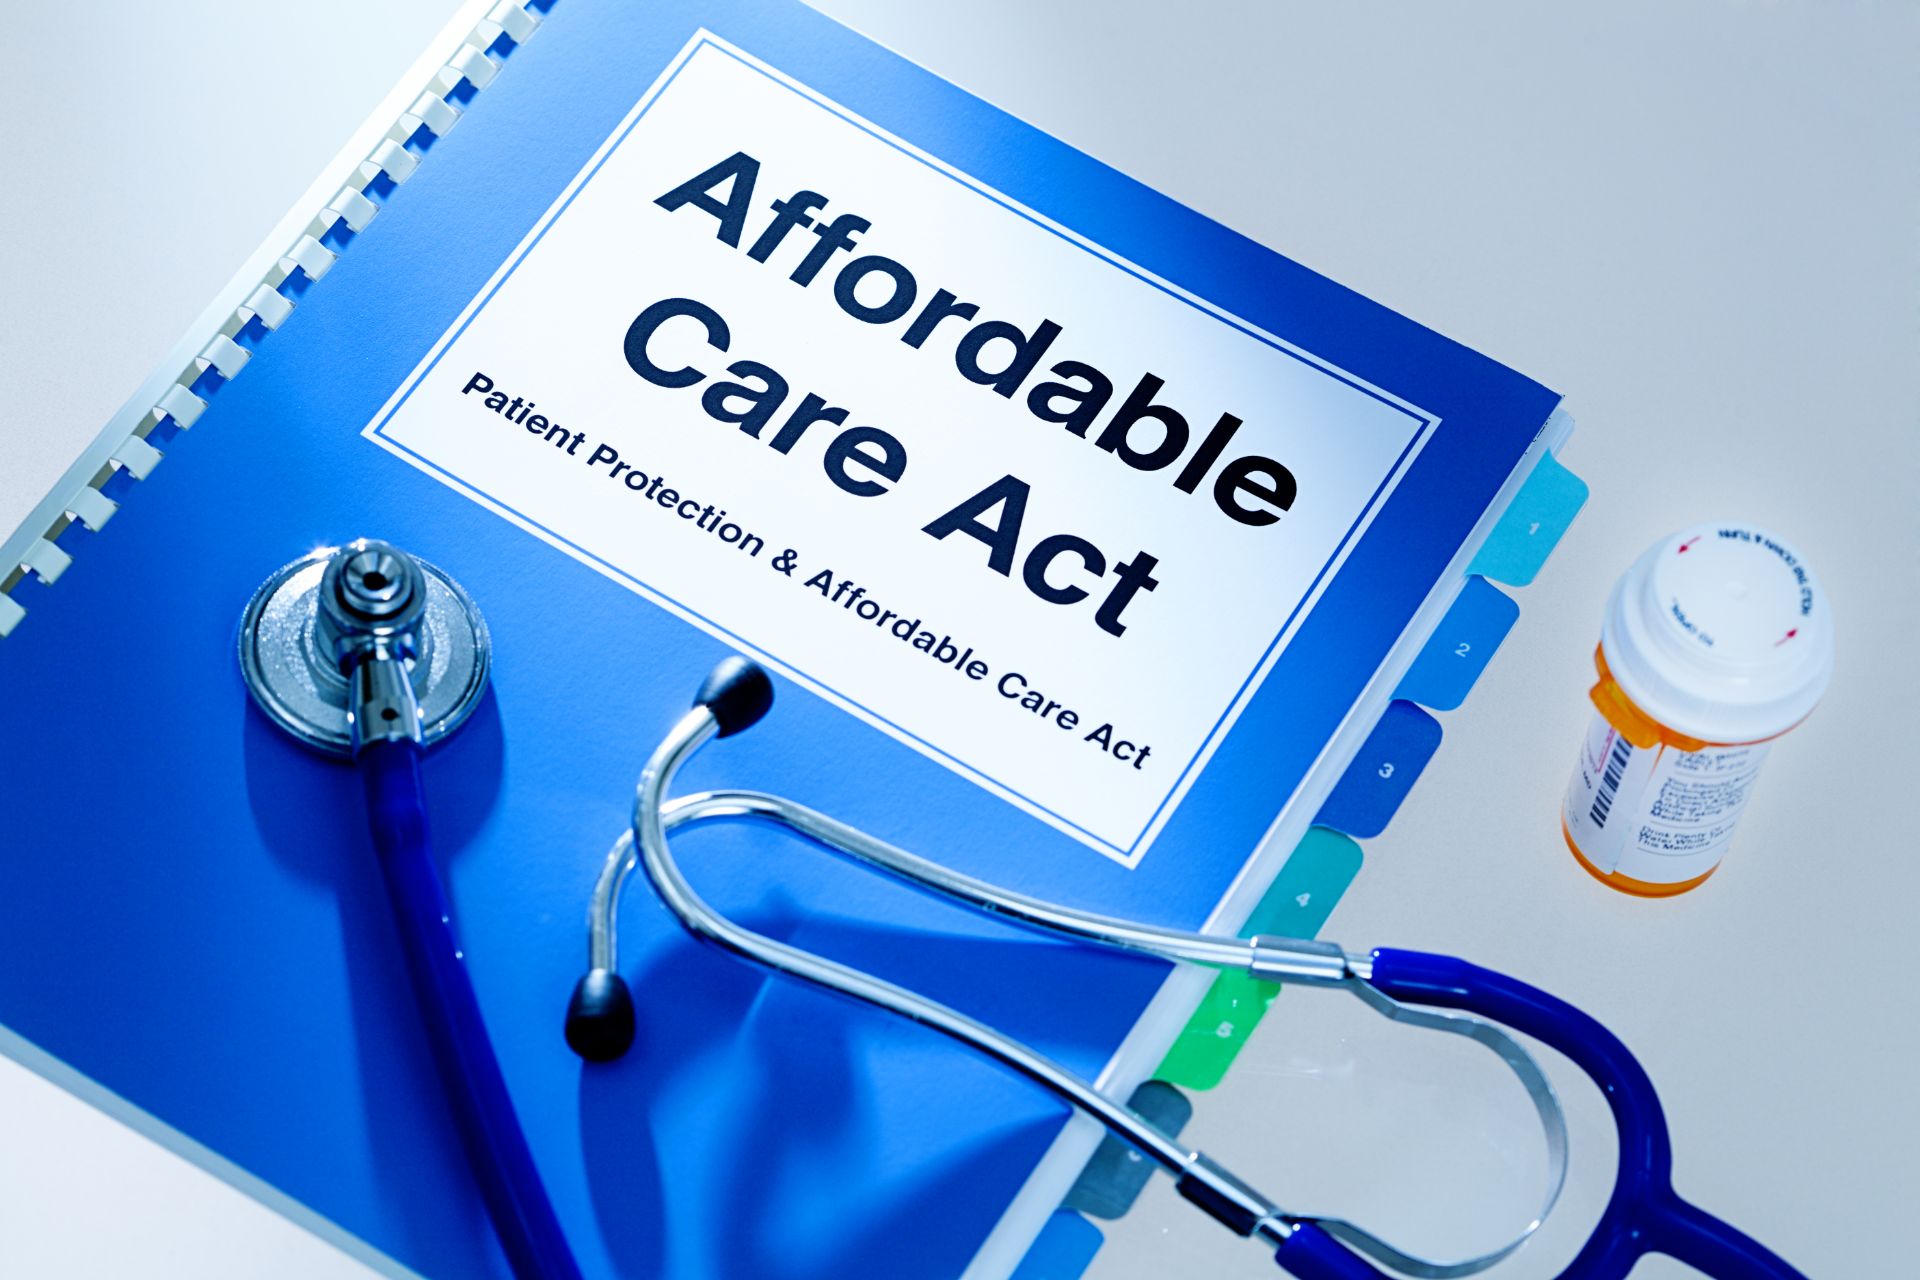 Affordable Care Act Notebook